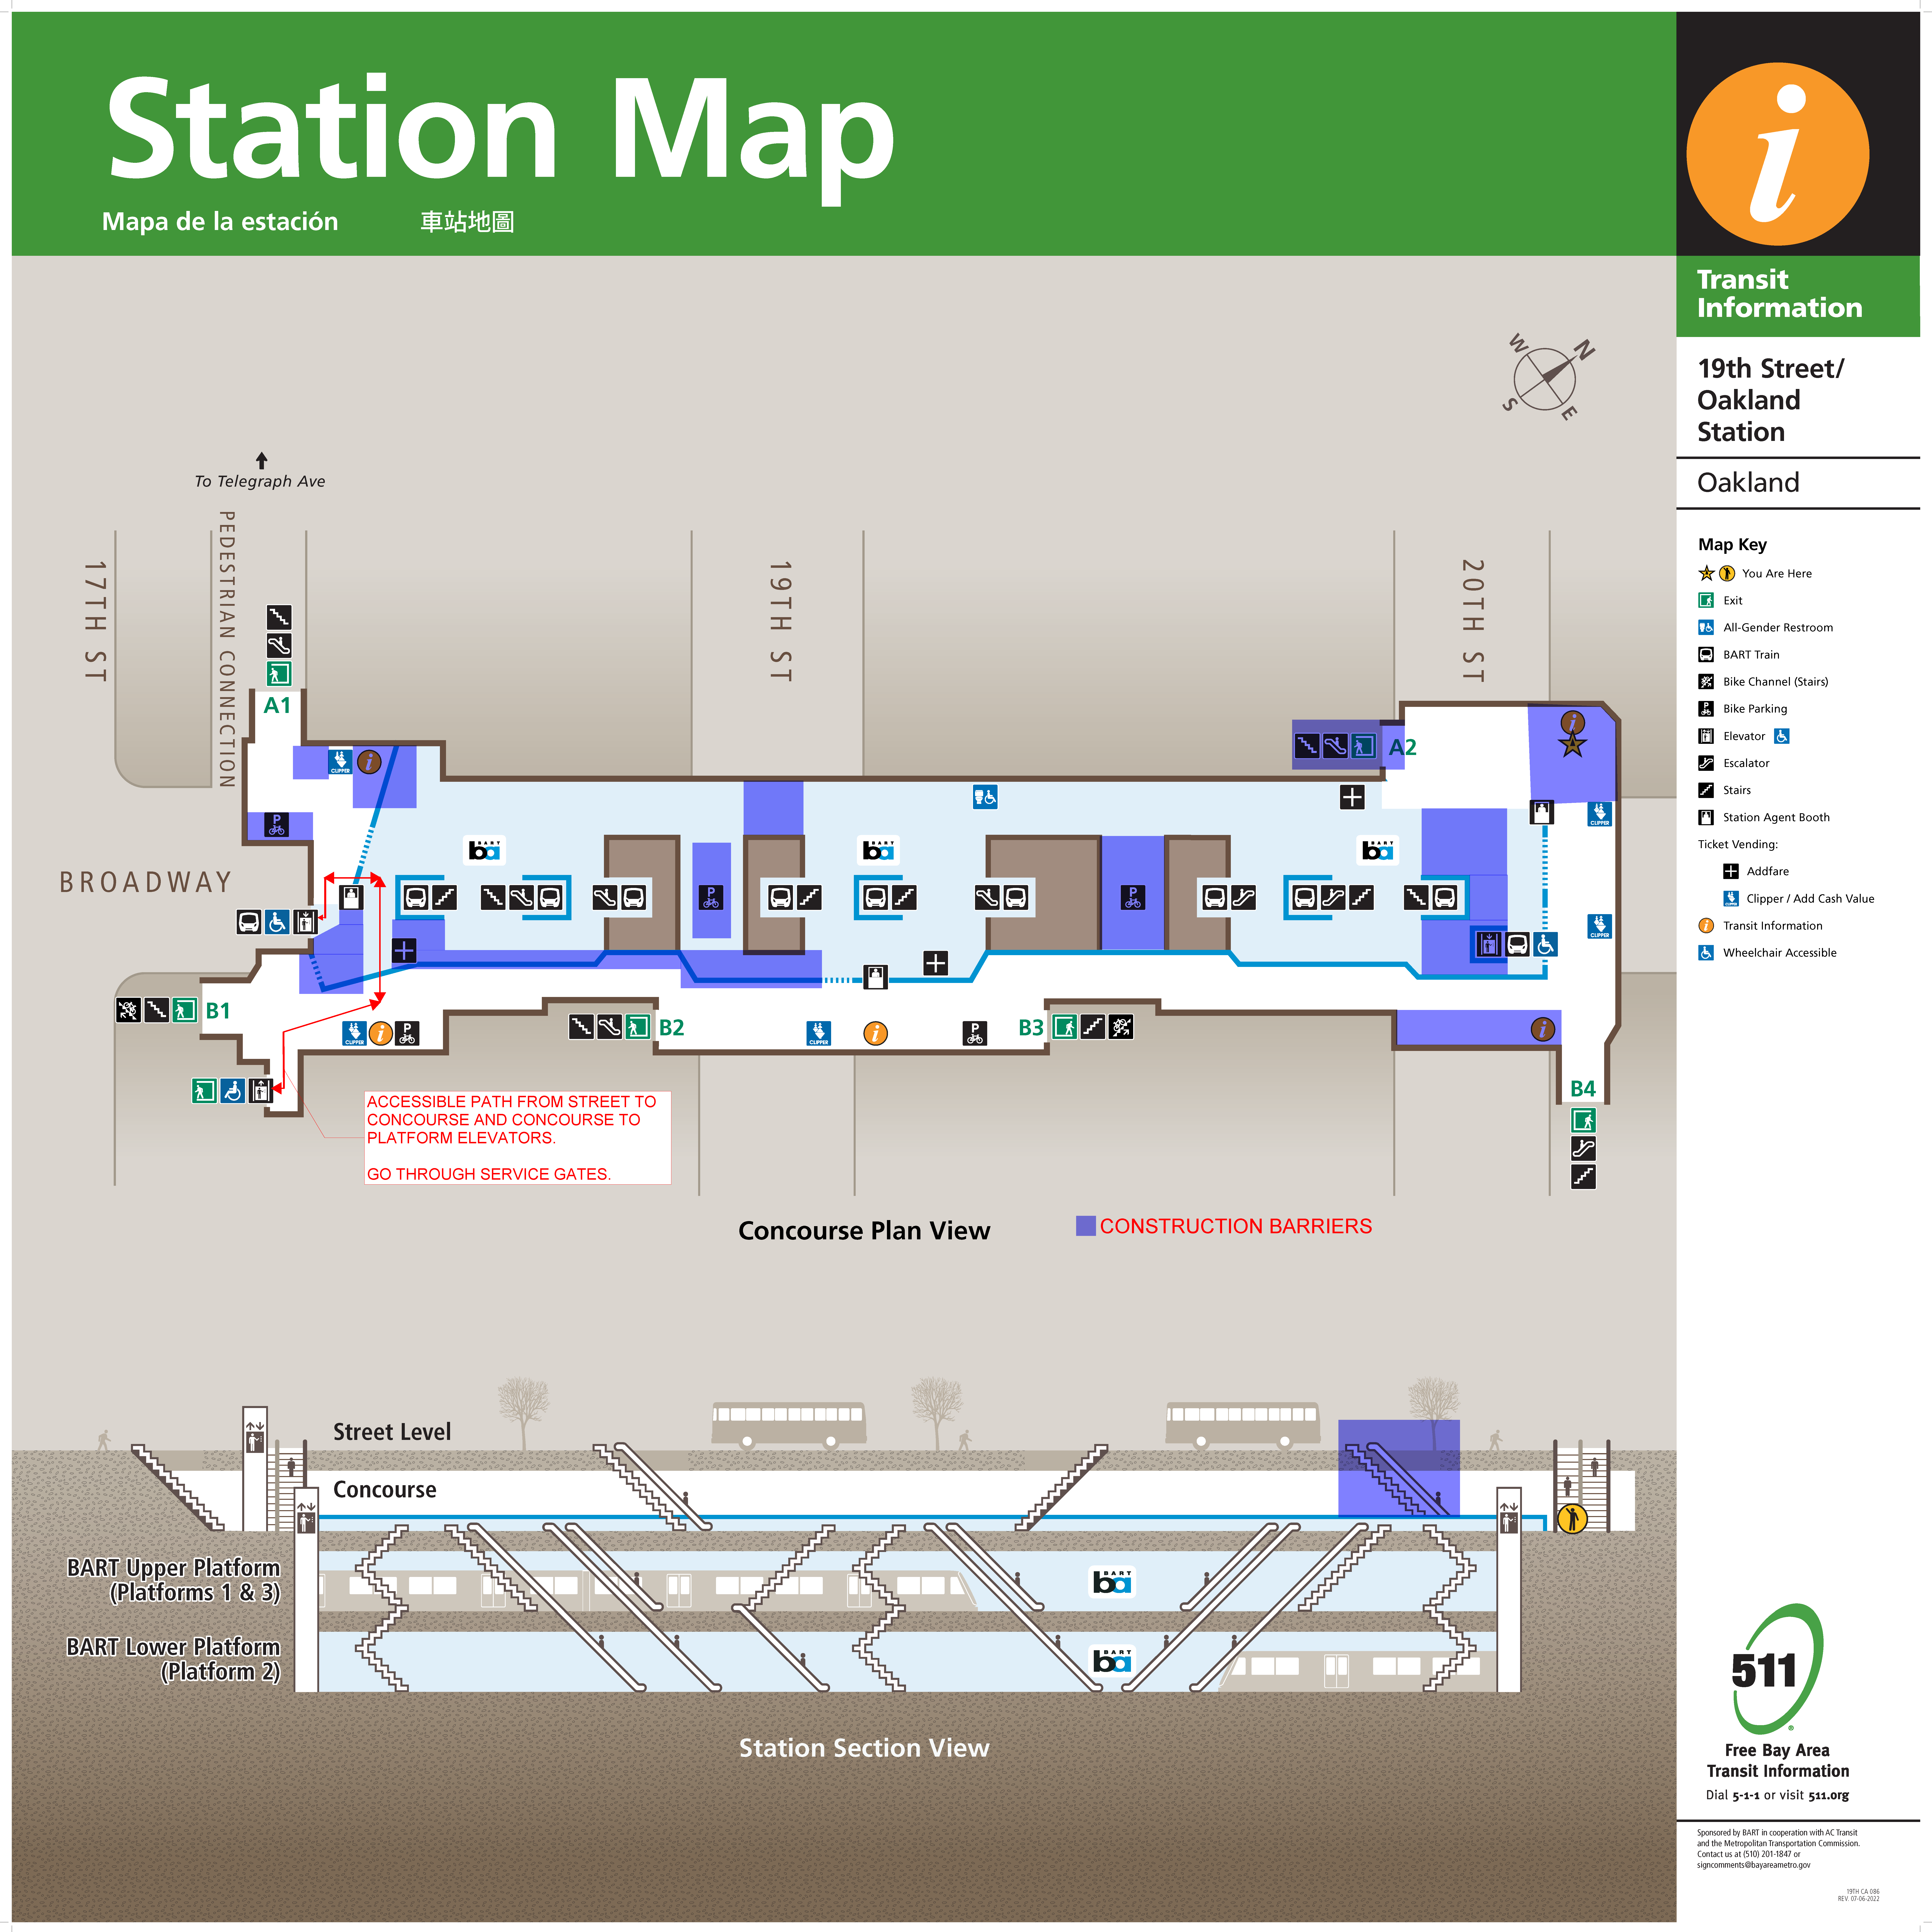 update 19th St. Oakland station entrance temporarily closing for improvements